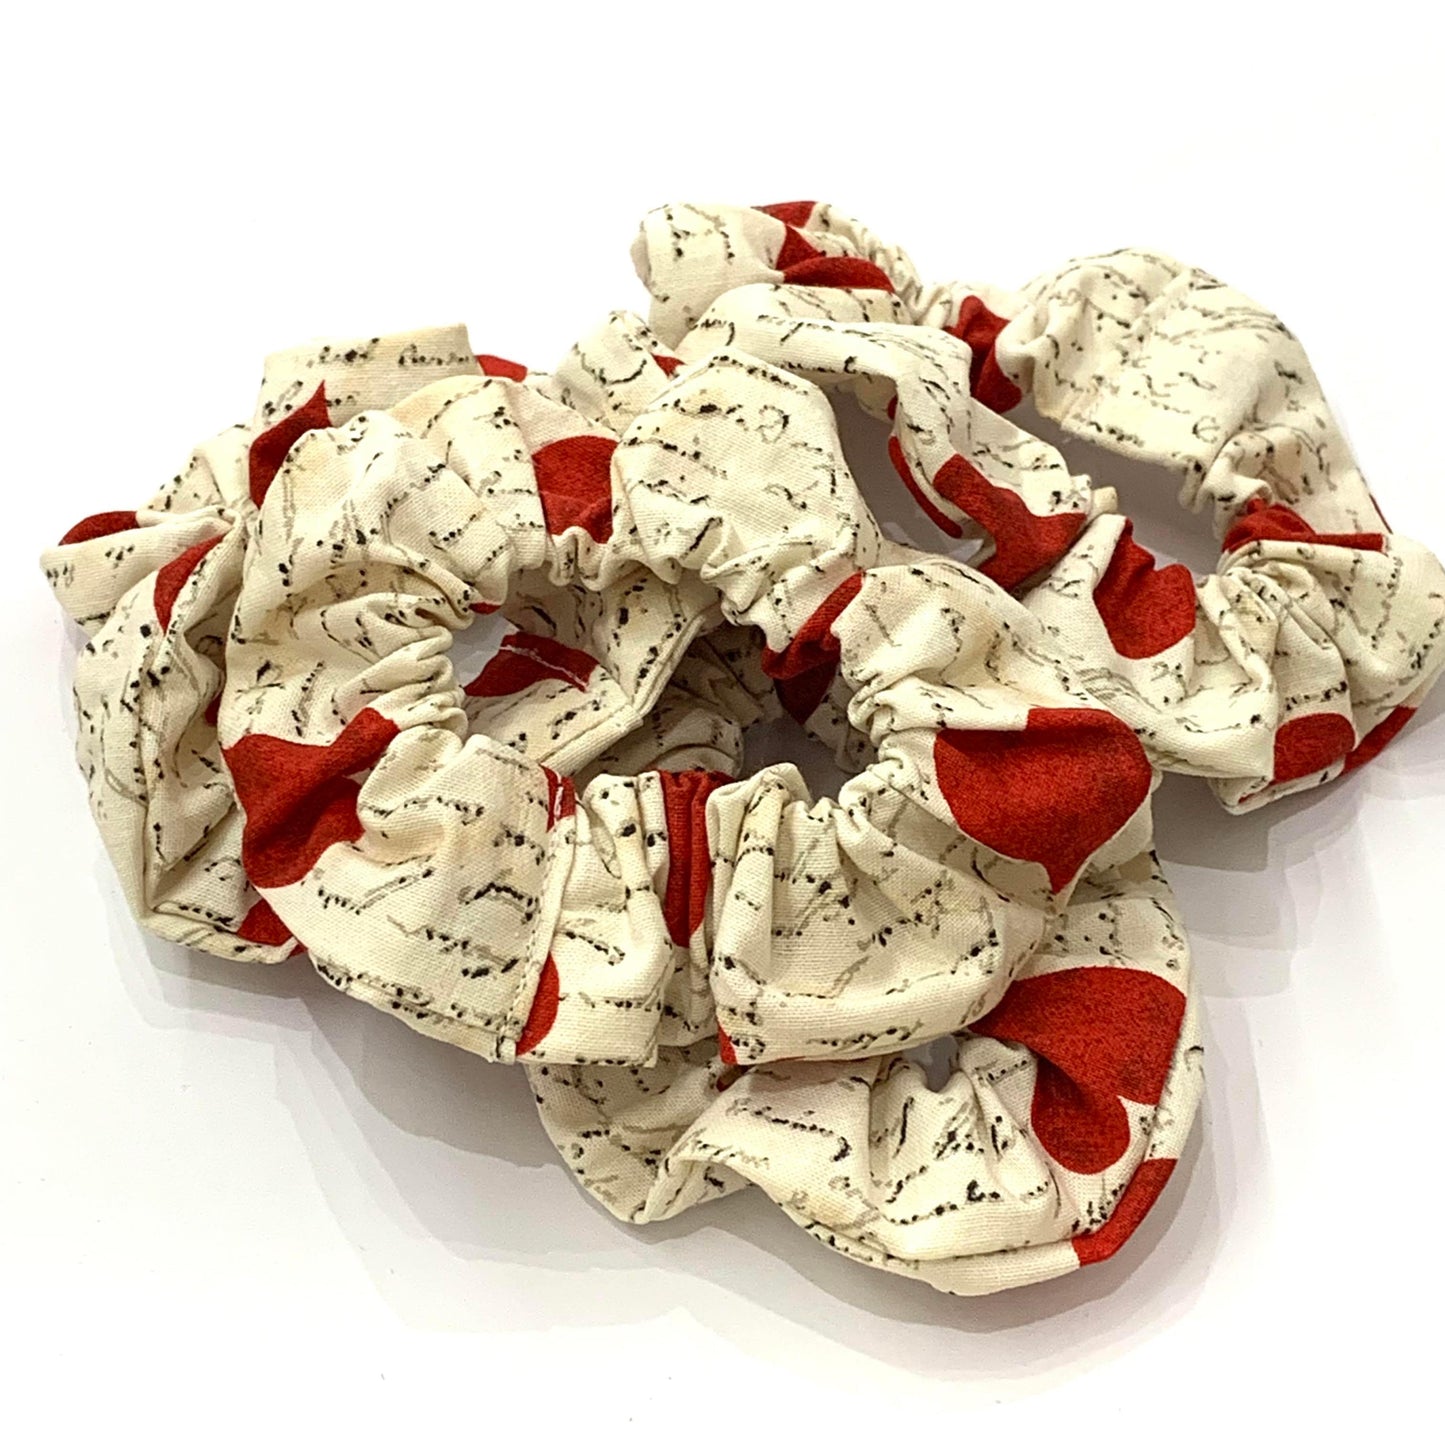 MAKIN' WHOOPEE - "Love Notes" SCRUNCHIE